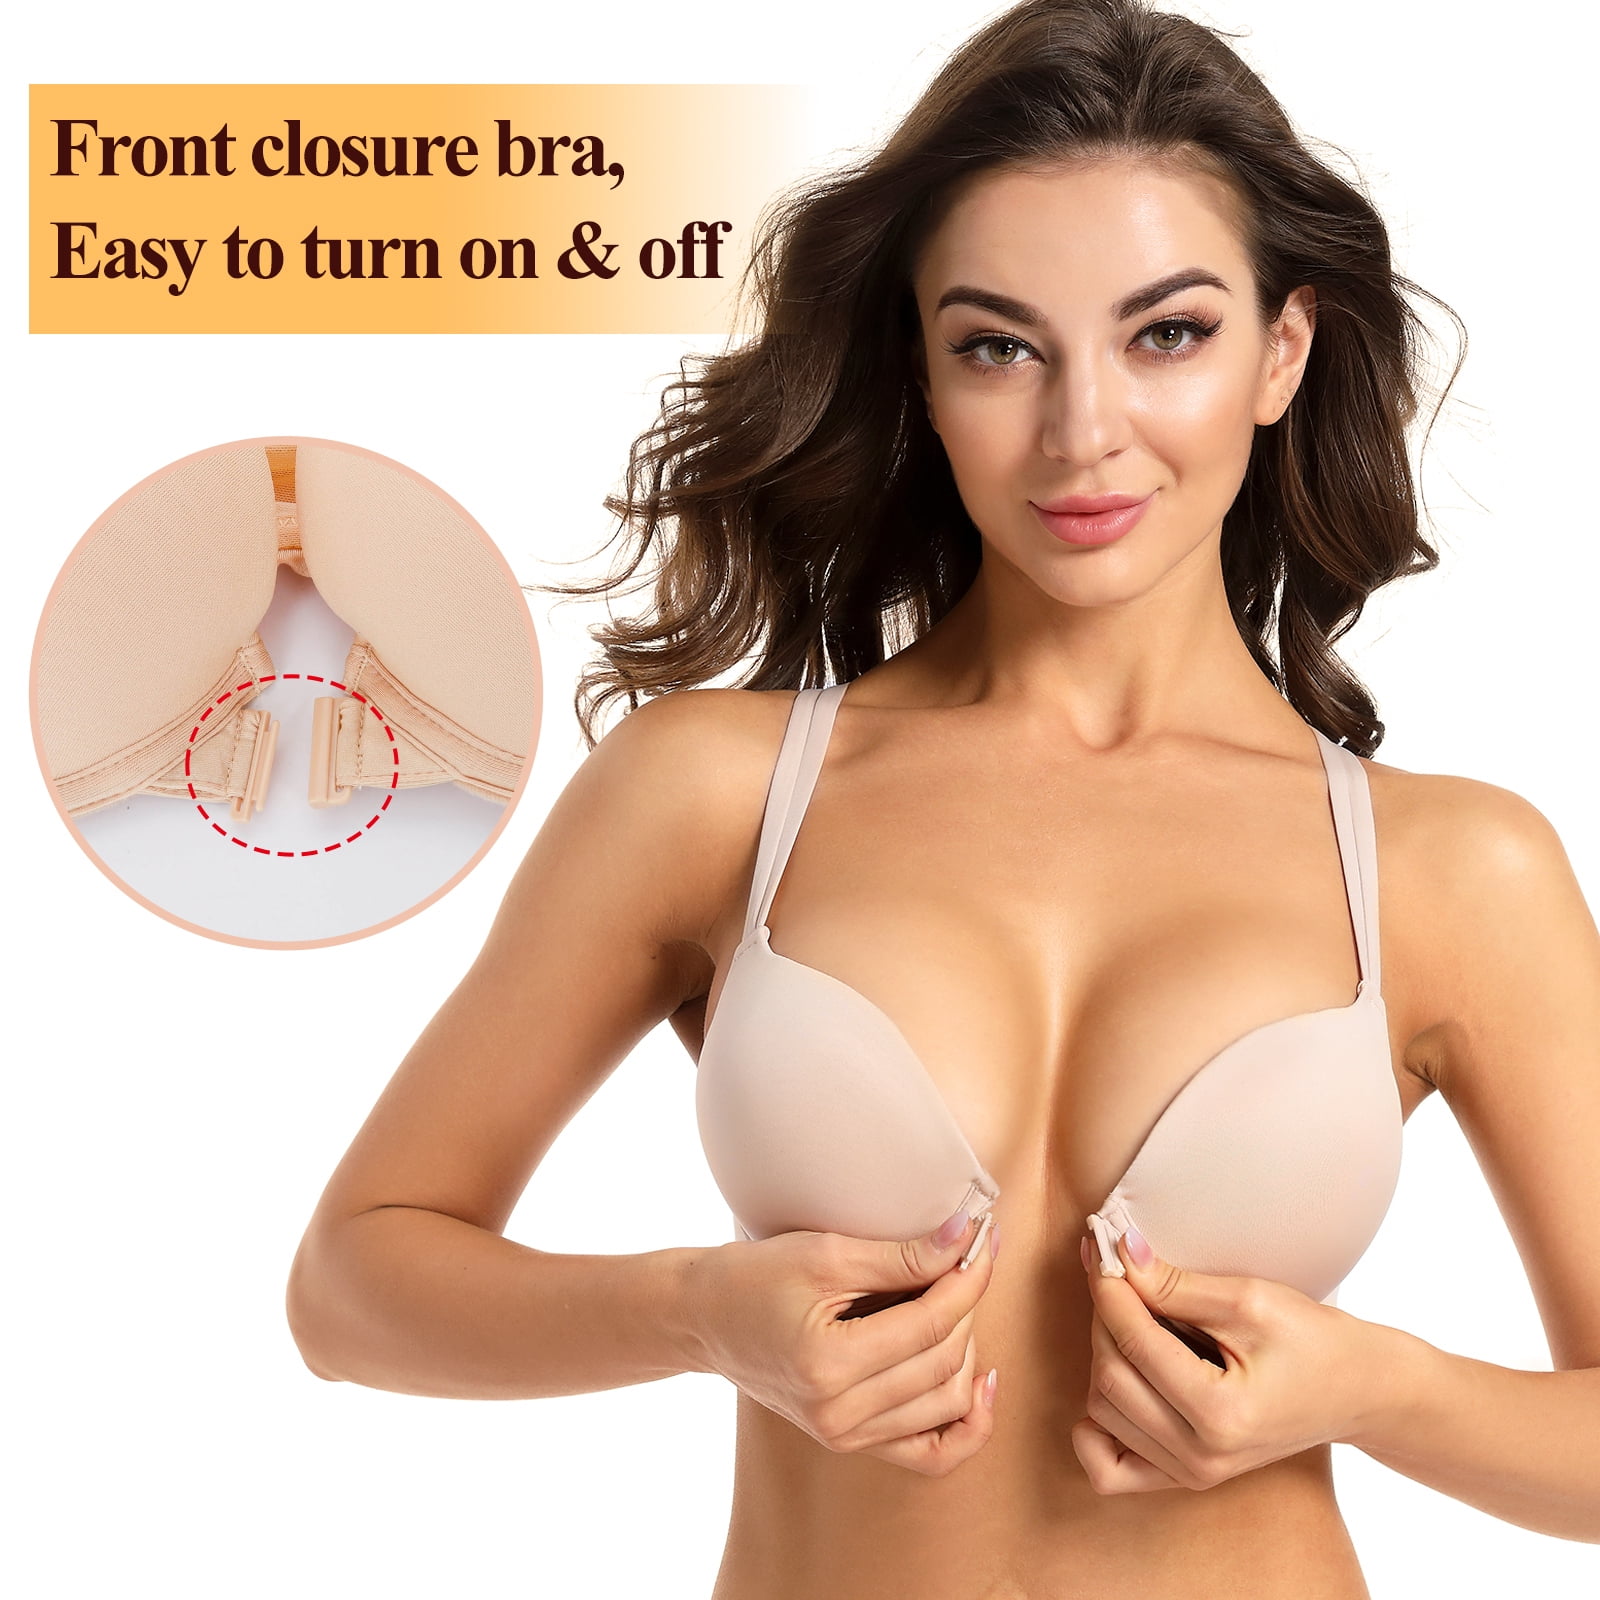 Yandw Women Bra Lace Embroidery Hollow Front Closure Nude Sexy